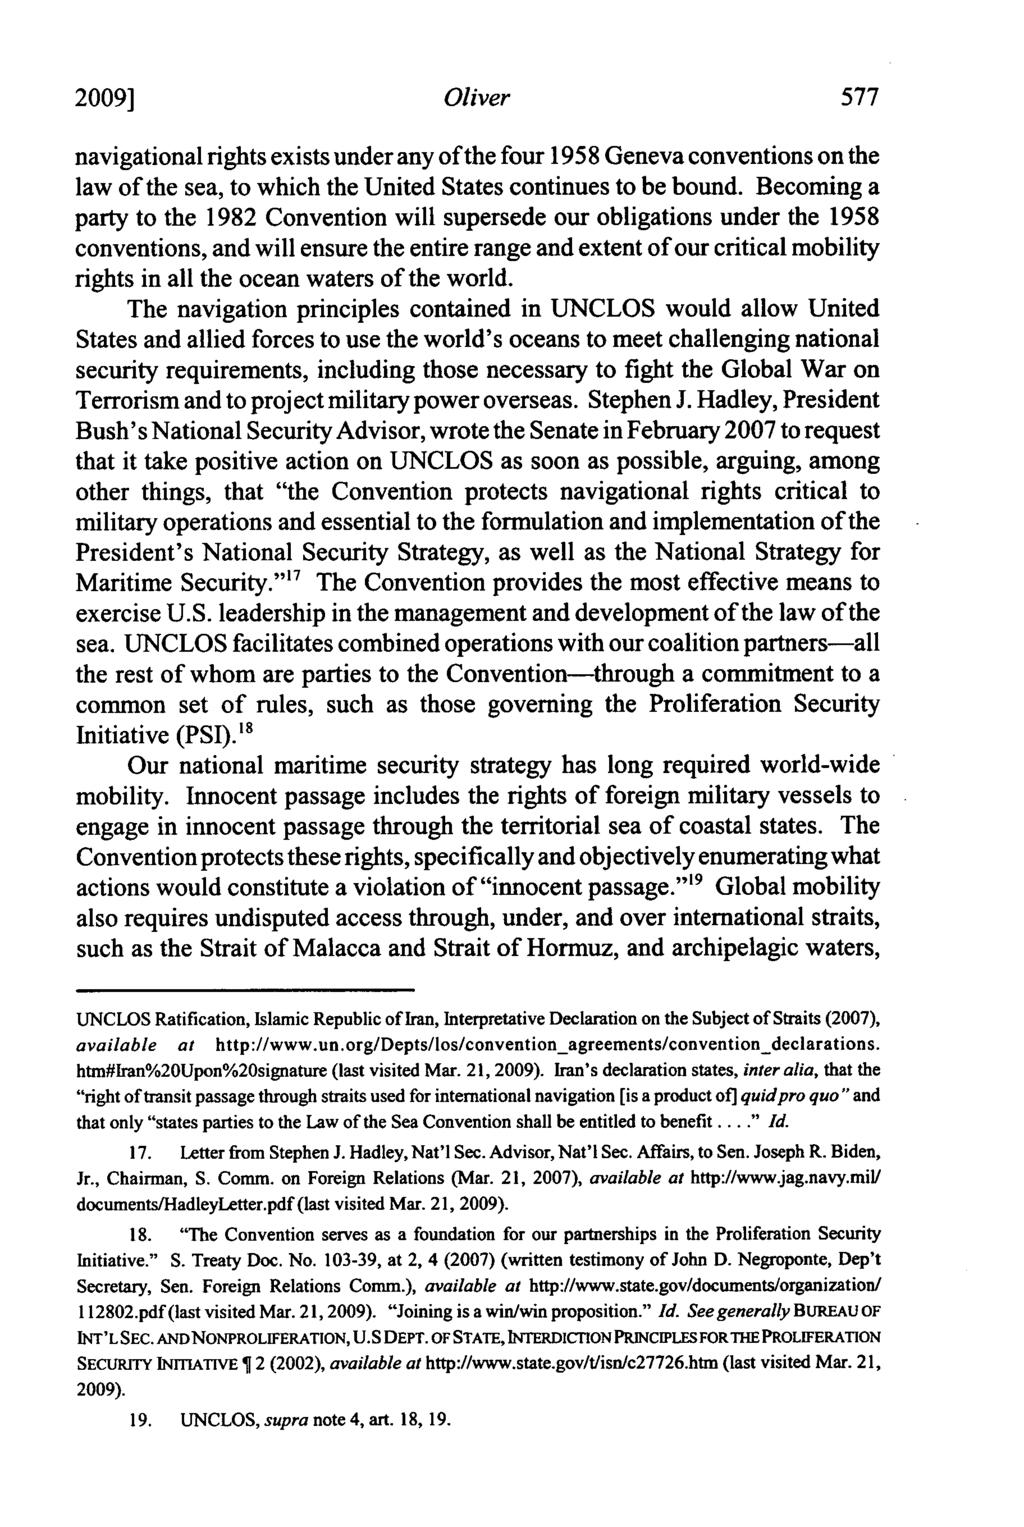 2009] Oliver navigational rights exists under any of the four 1958 Geneva conventions on the law of the sea, to which the United States continues to be bound.